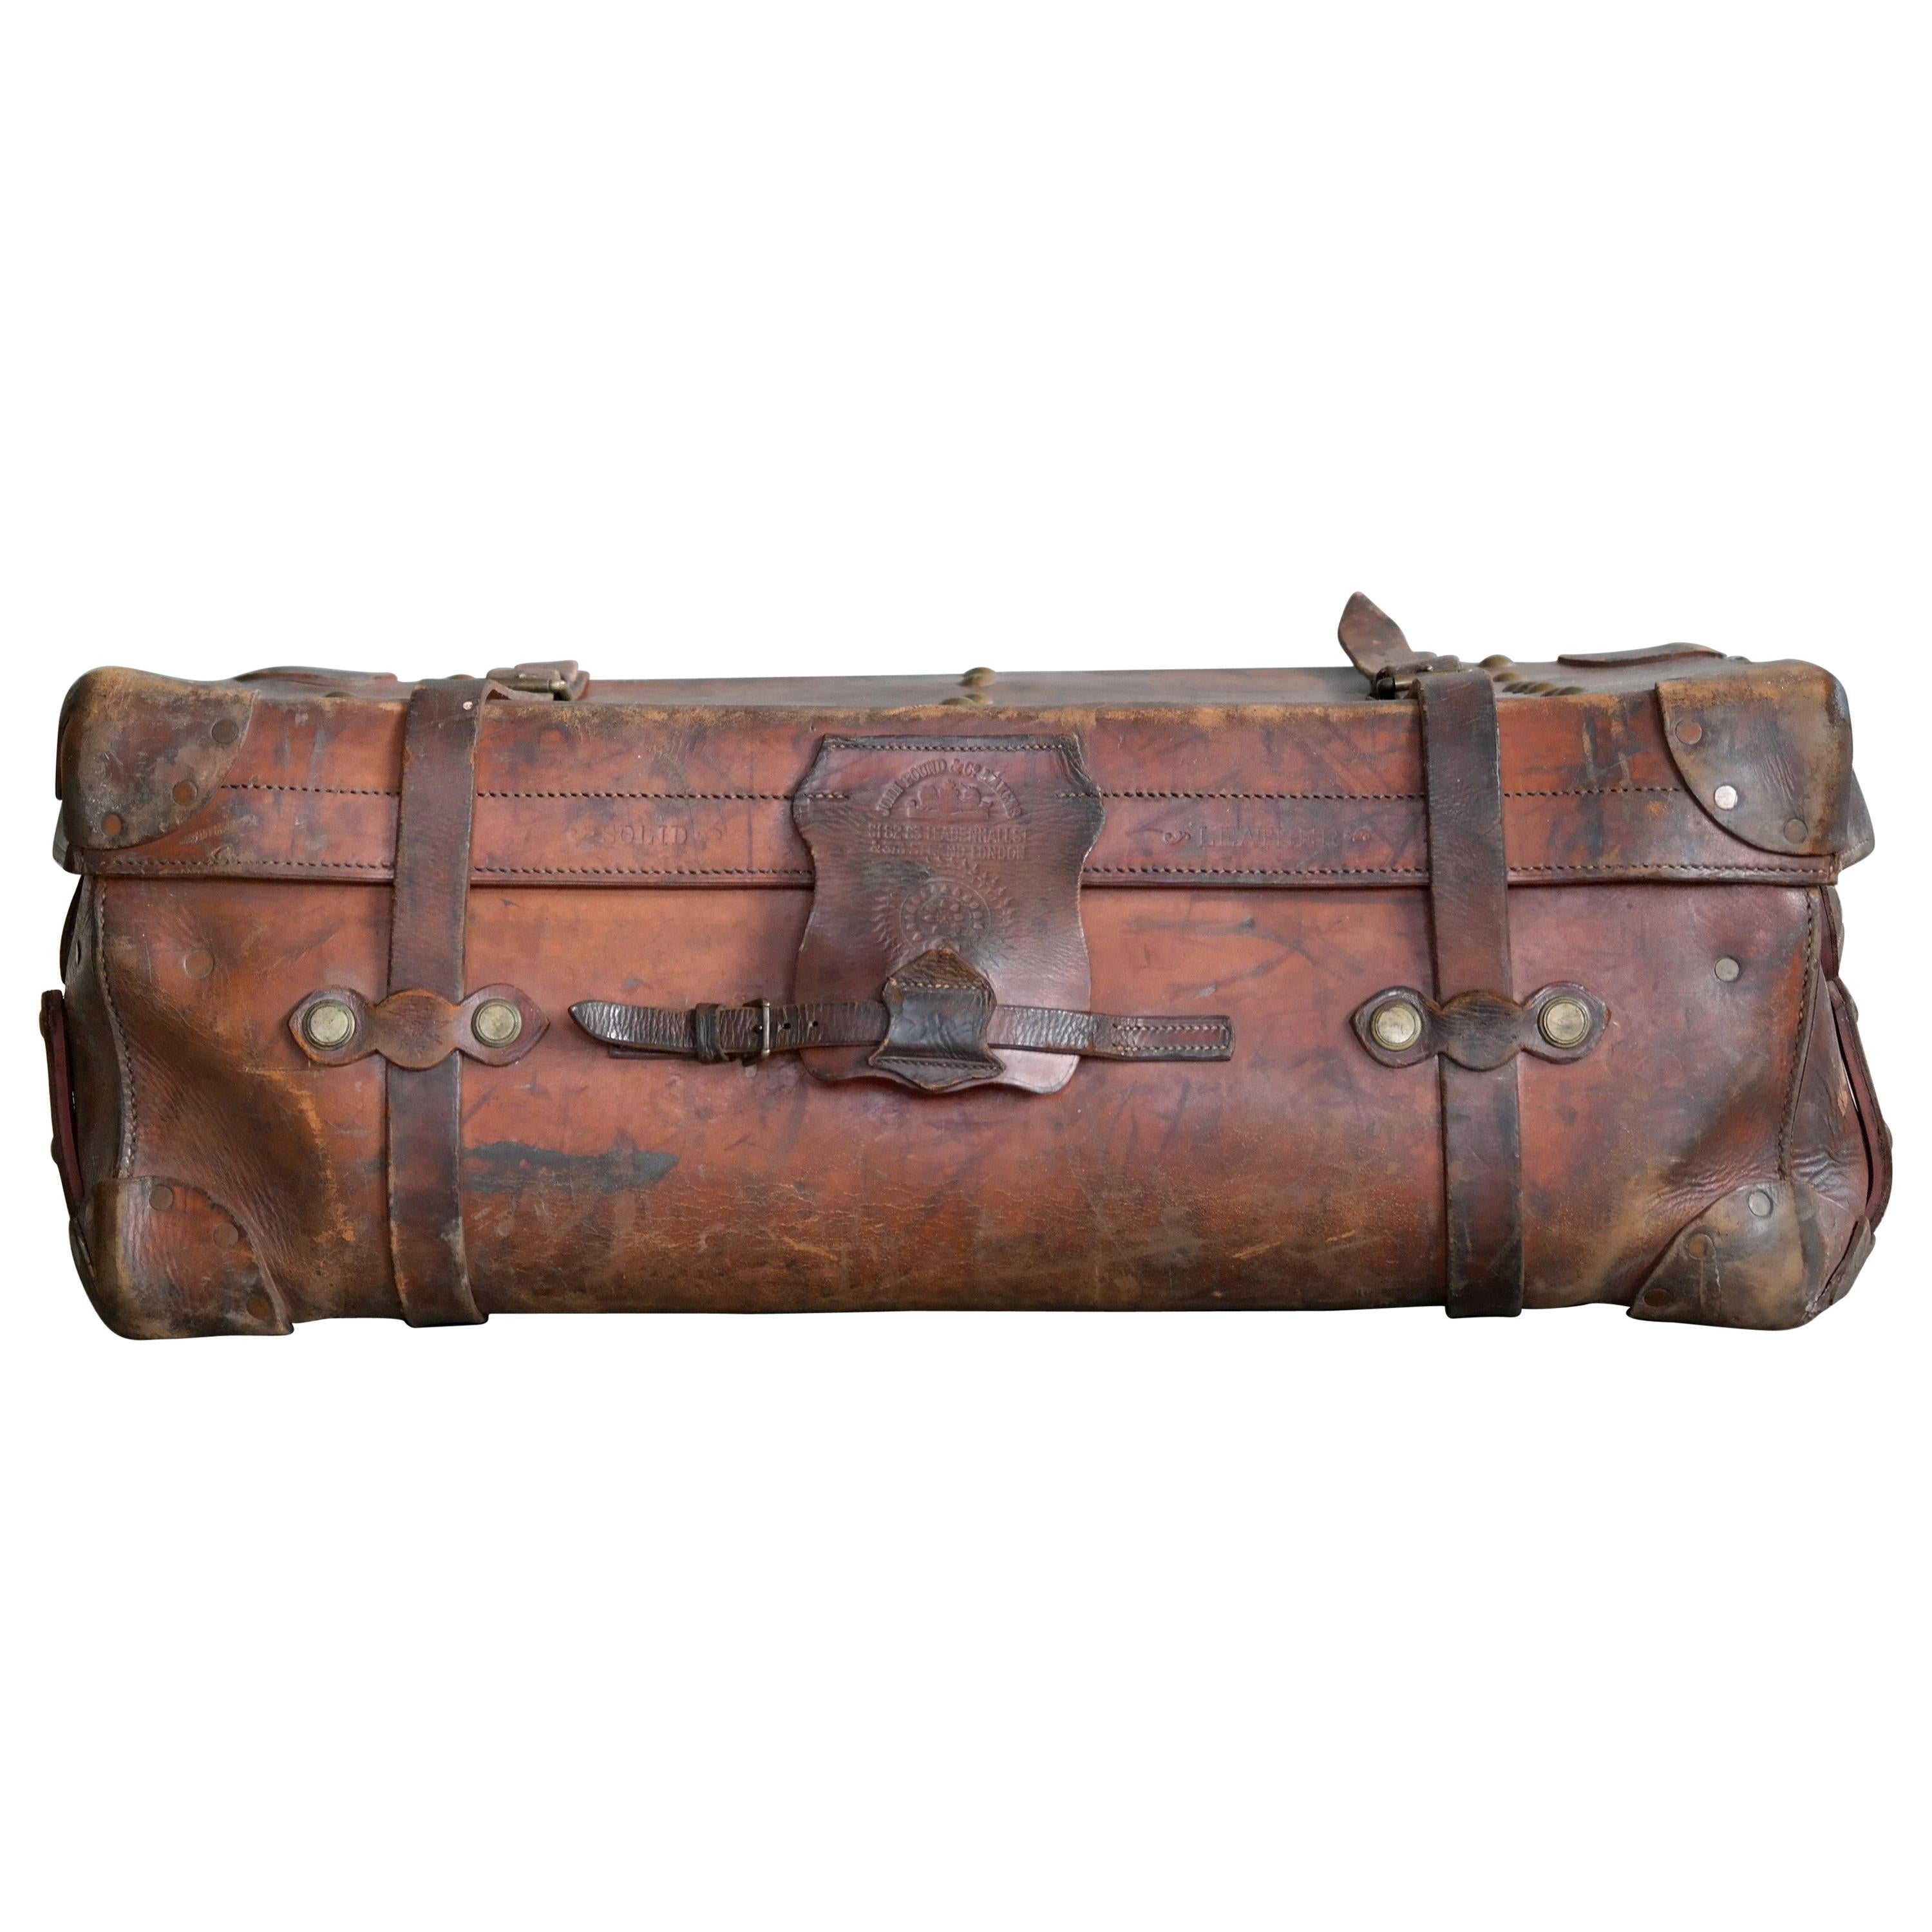 English Leather Travel or Steamer Trunk by John Pound & Co. England, circa 1883